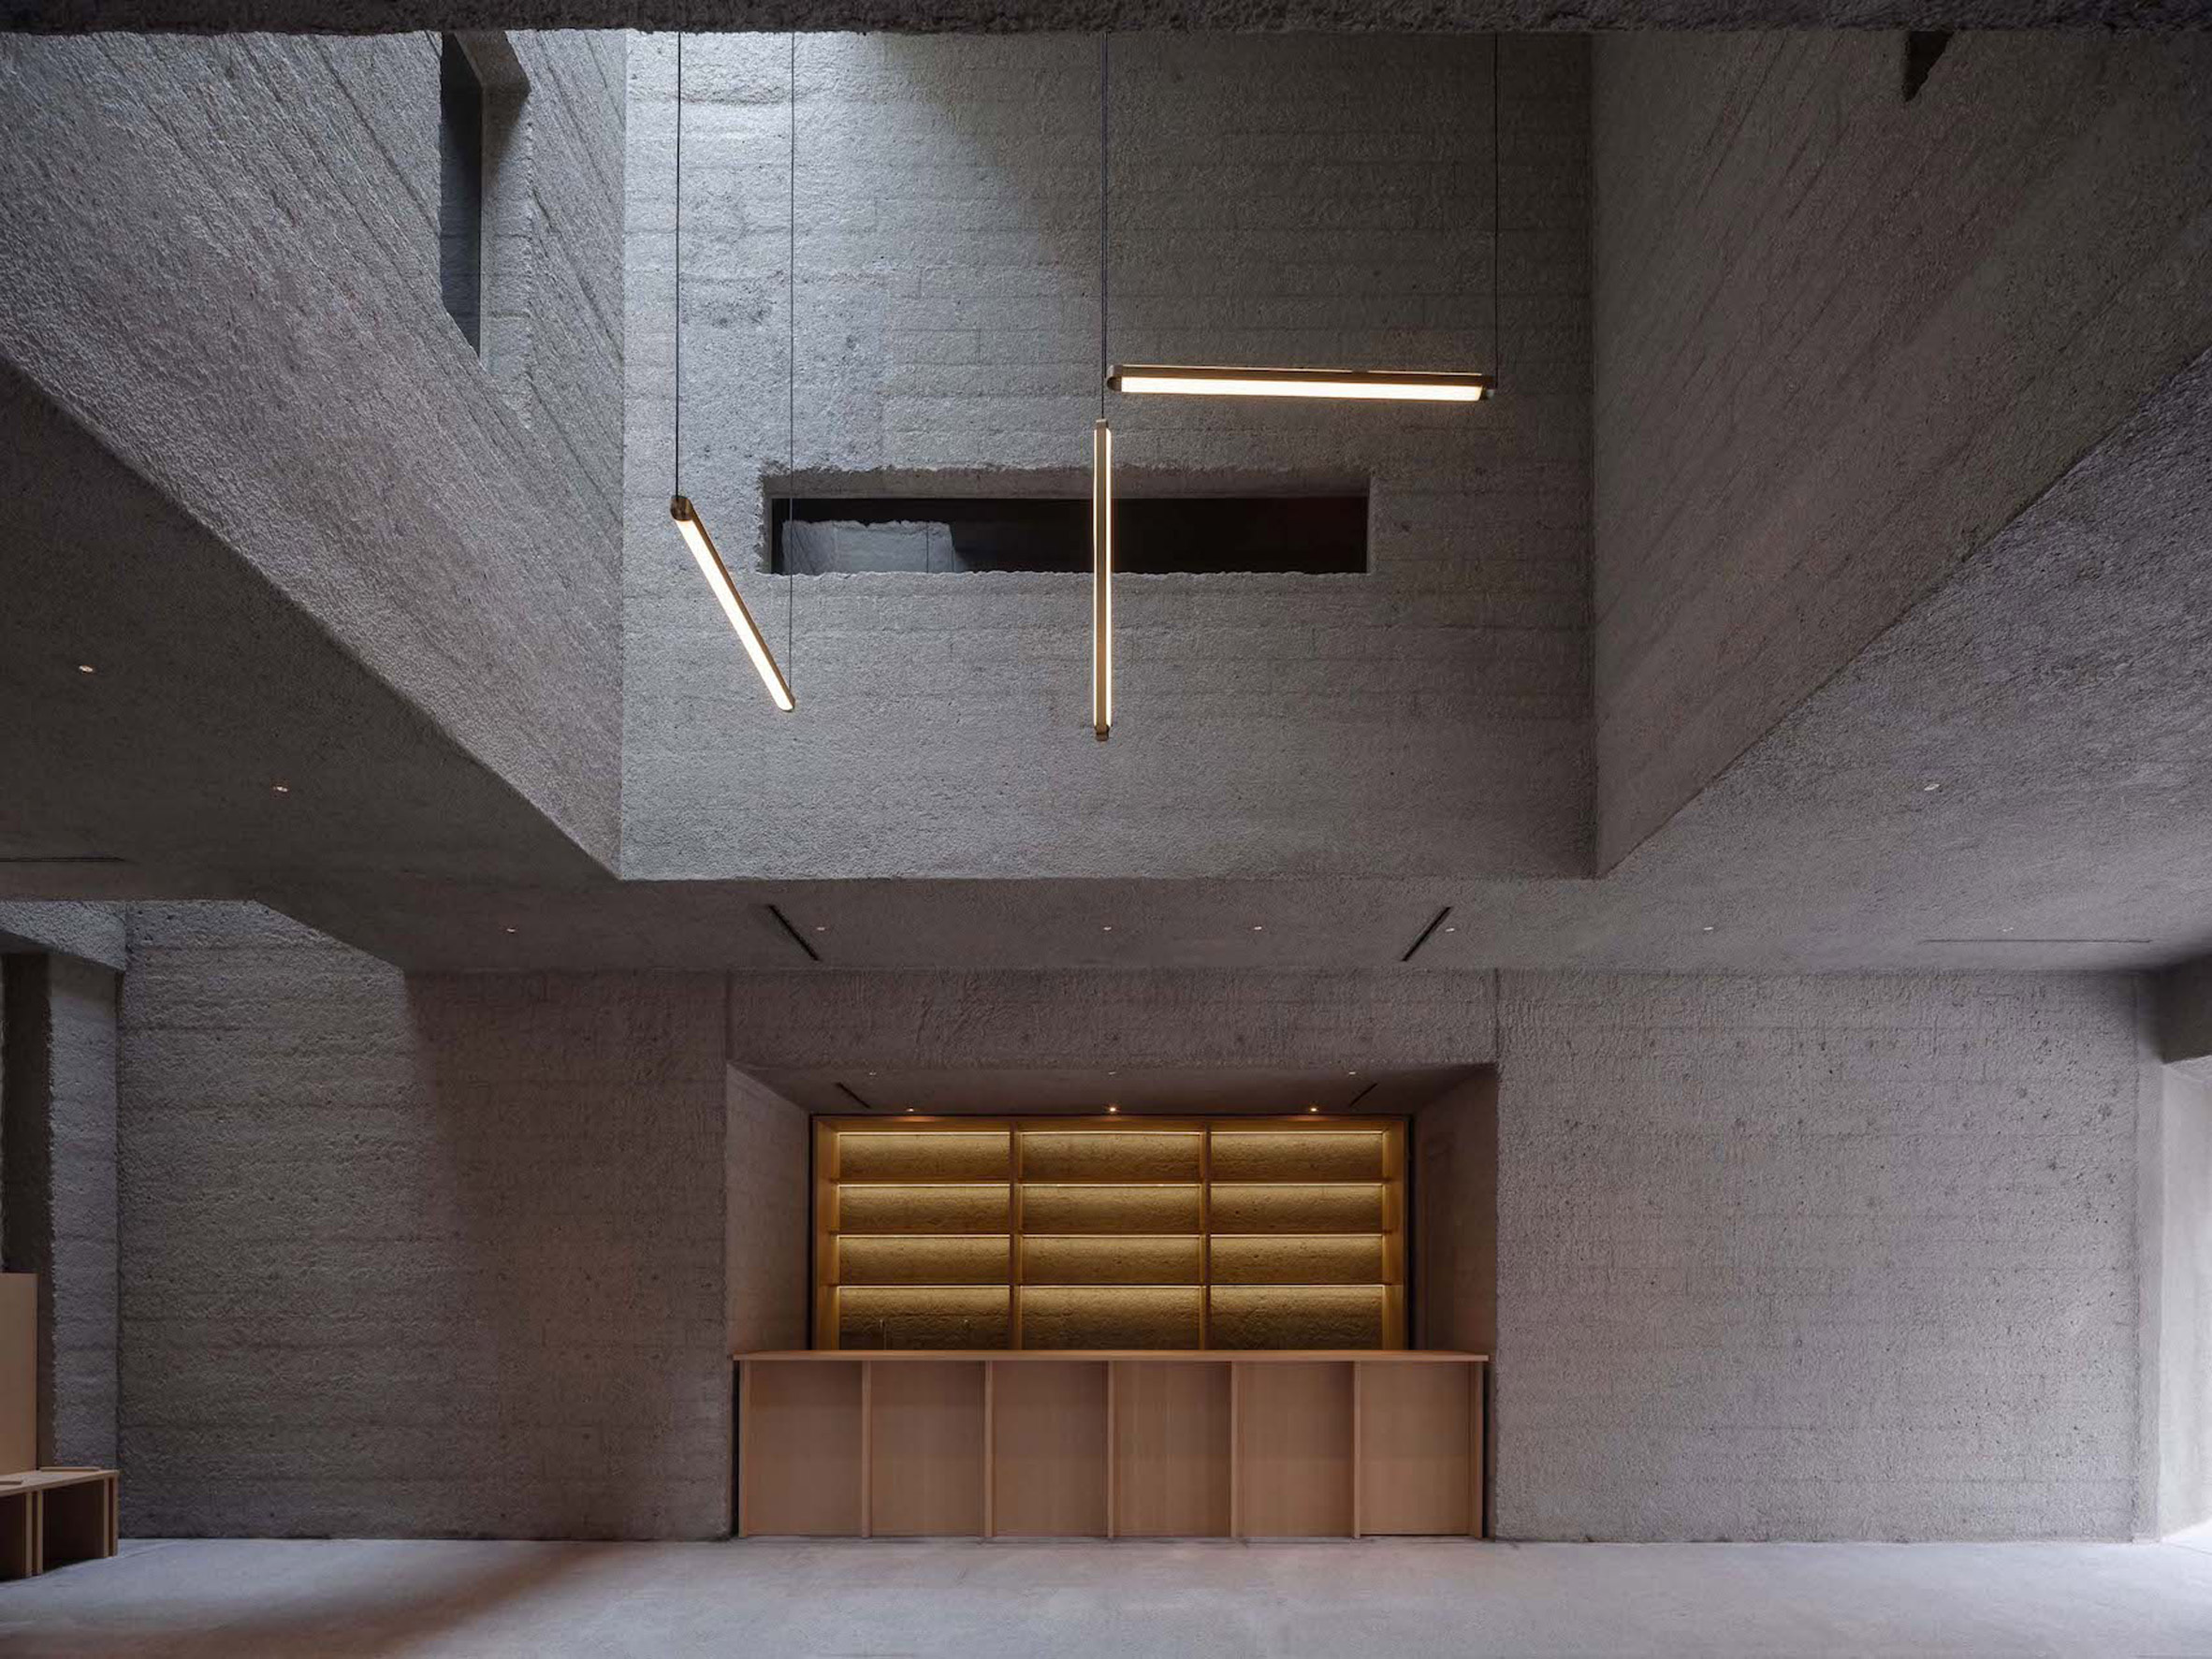 High concrete walls in a room with tube lighting